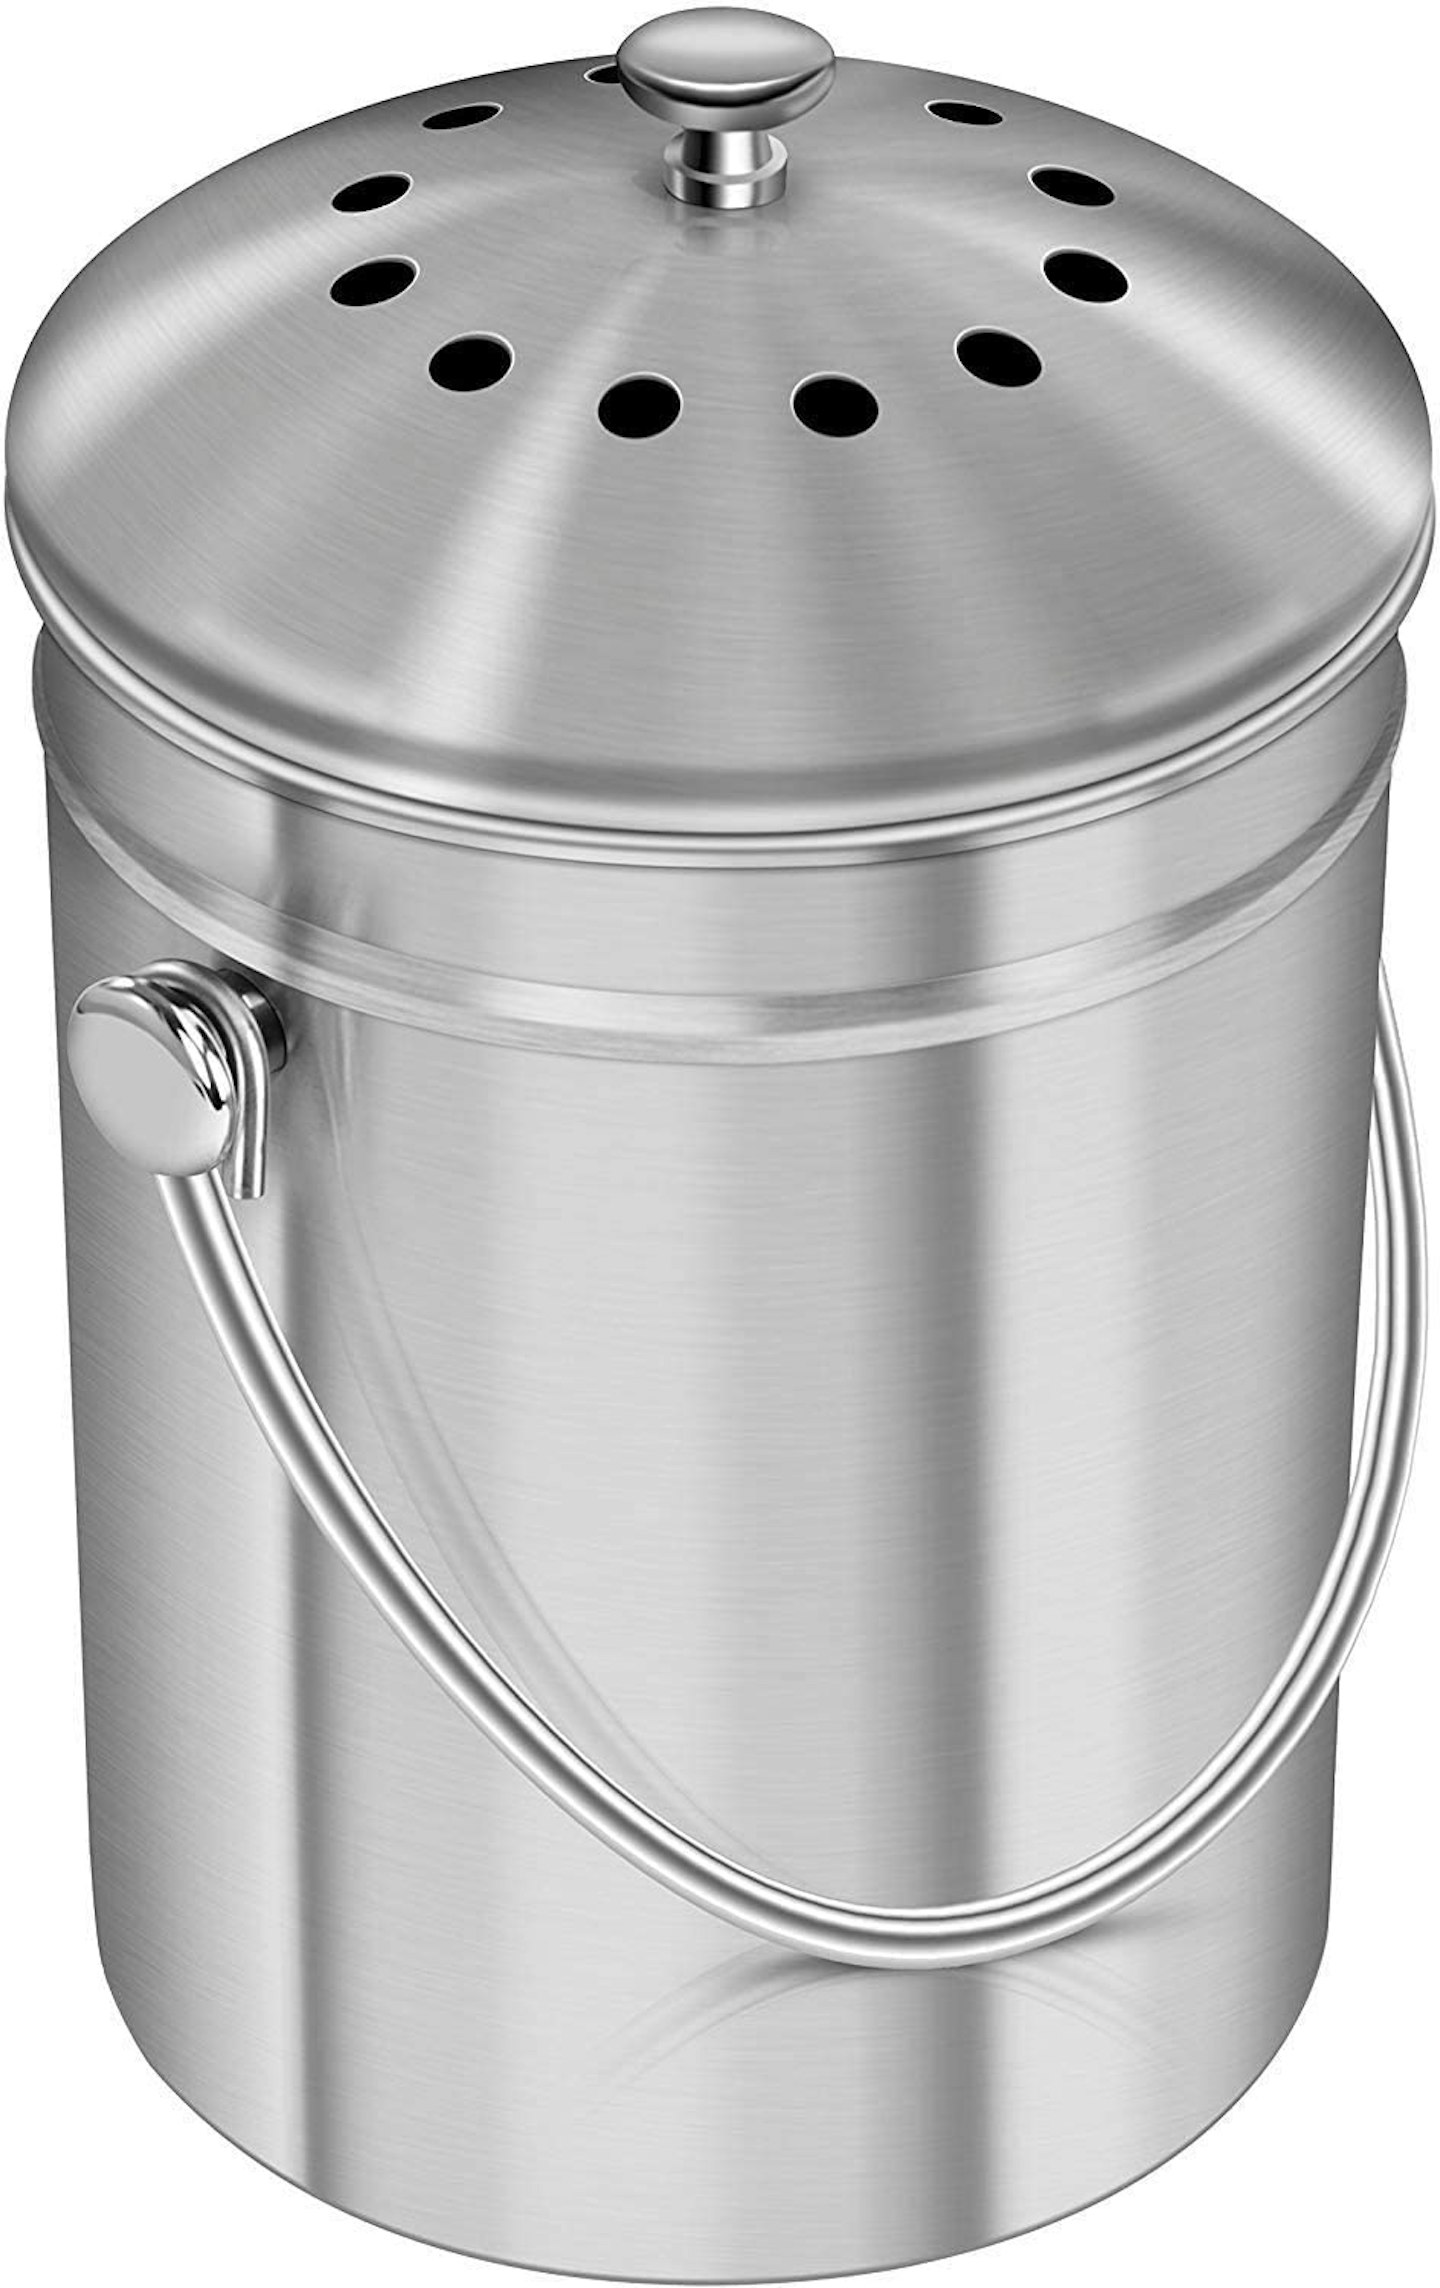 KICHLY Stainless Steel Compost Bin for Kitchen Countertop